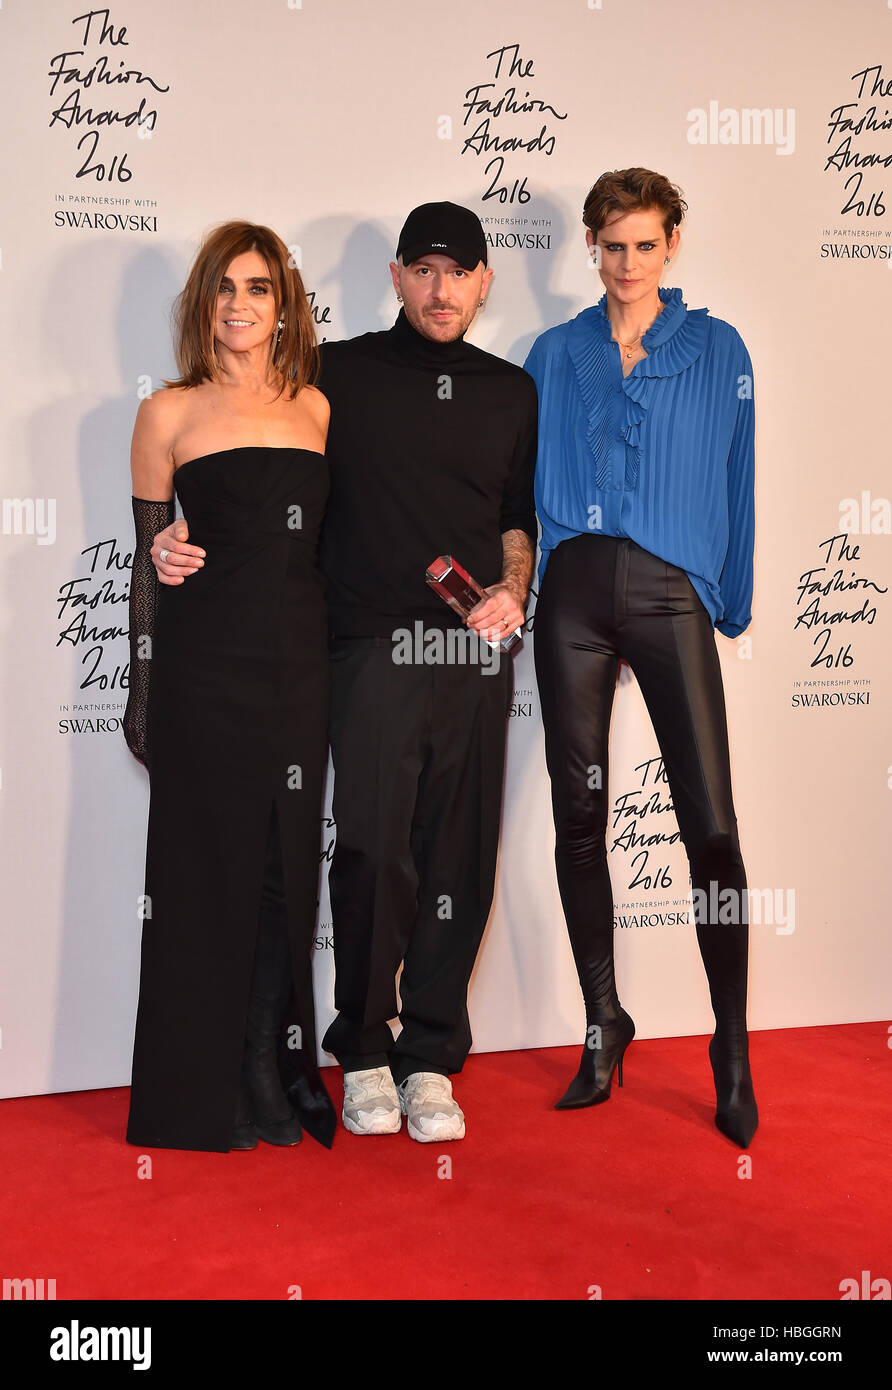 Demna Gvasalia and his award for International Ready To Wear Designer  alongside Carine Roitfeld and Stella Tennant in the press room during The  Fashion Awards 2016 at the Royal Albert Hall, London